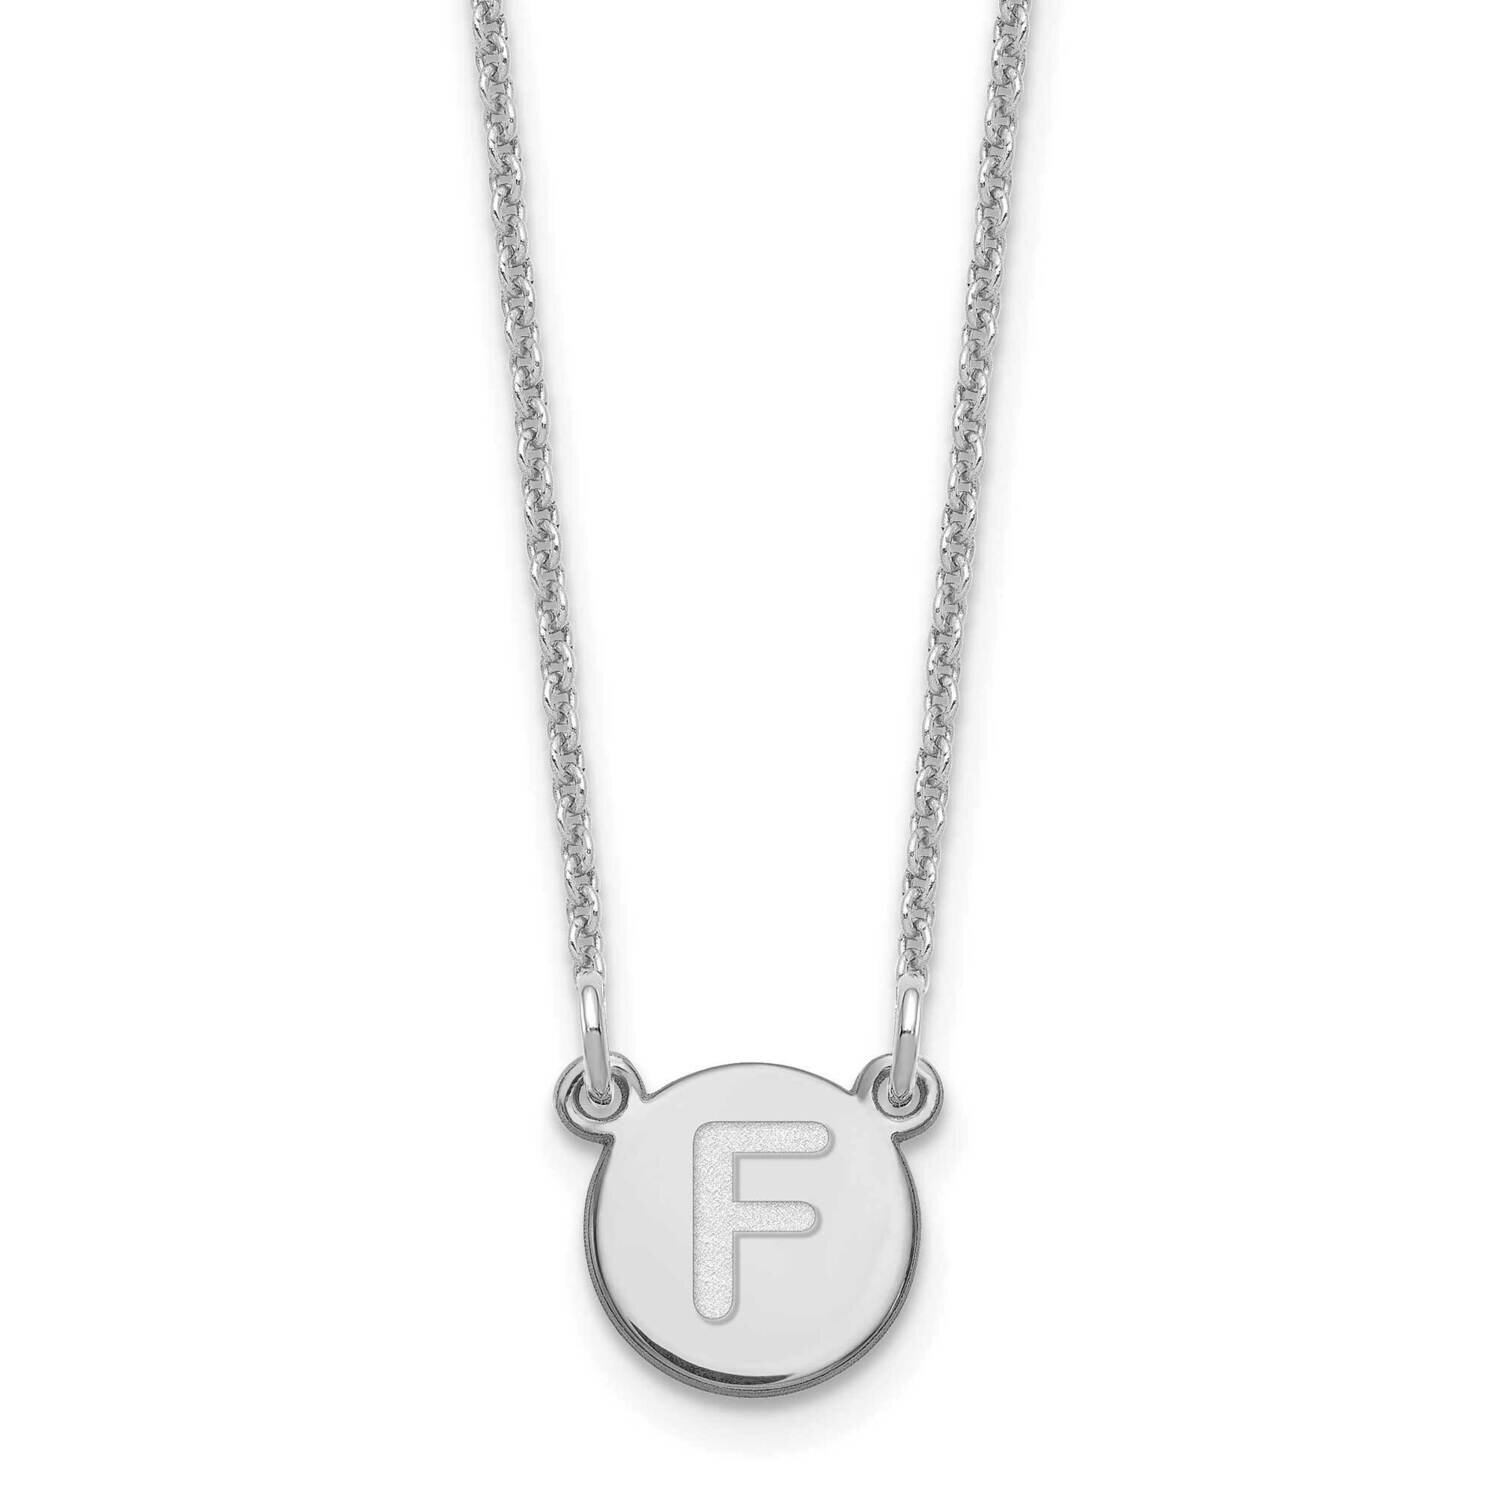 Tiny Circle Block Initial Letter F Necklace 14k White Gold XNA722W/F